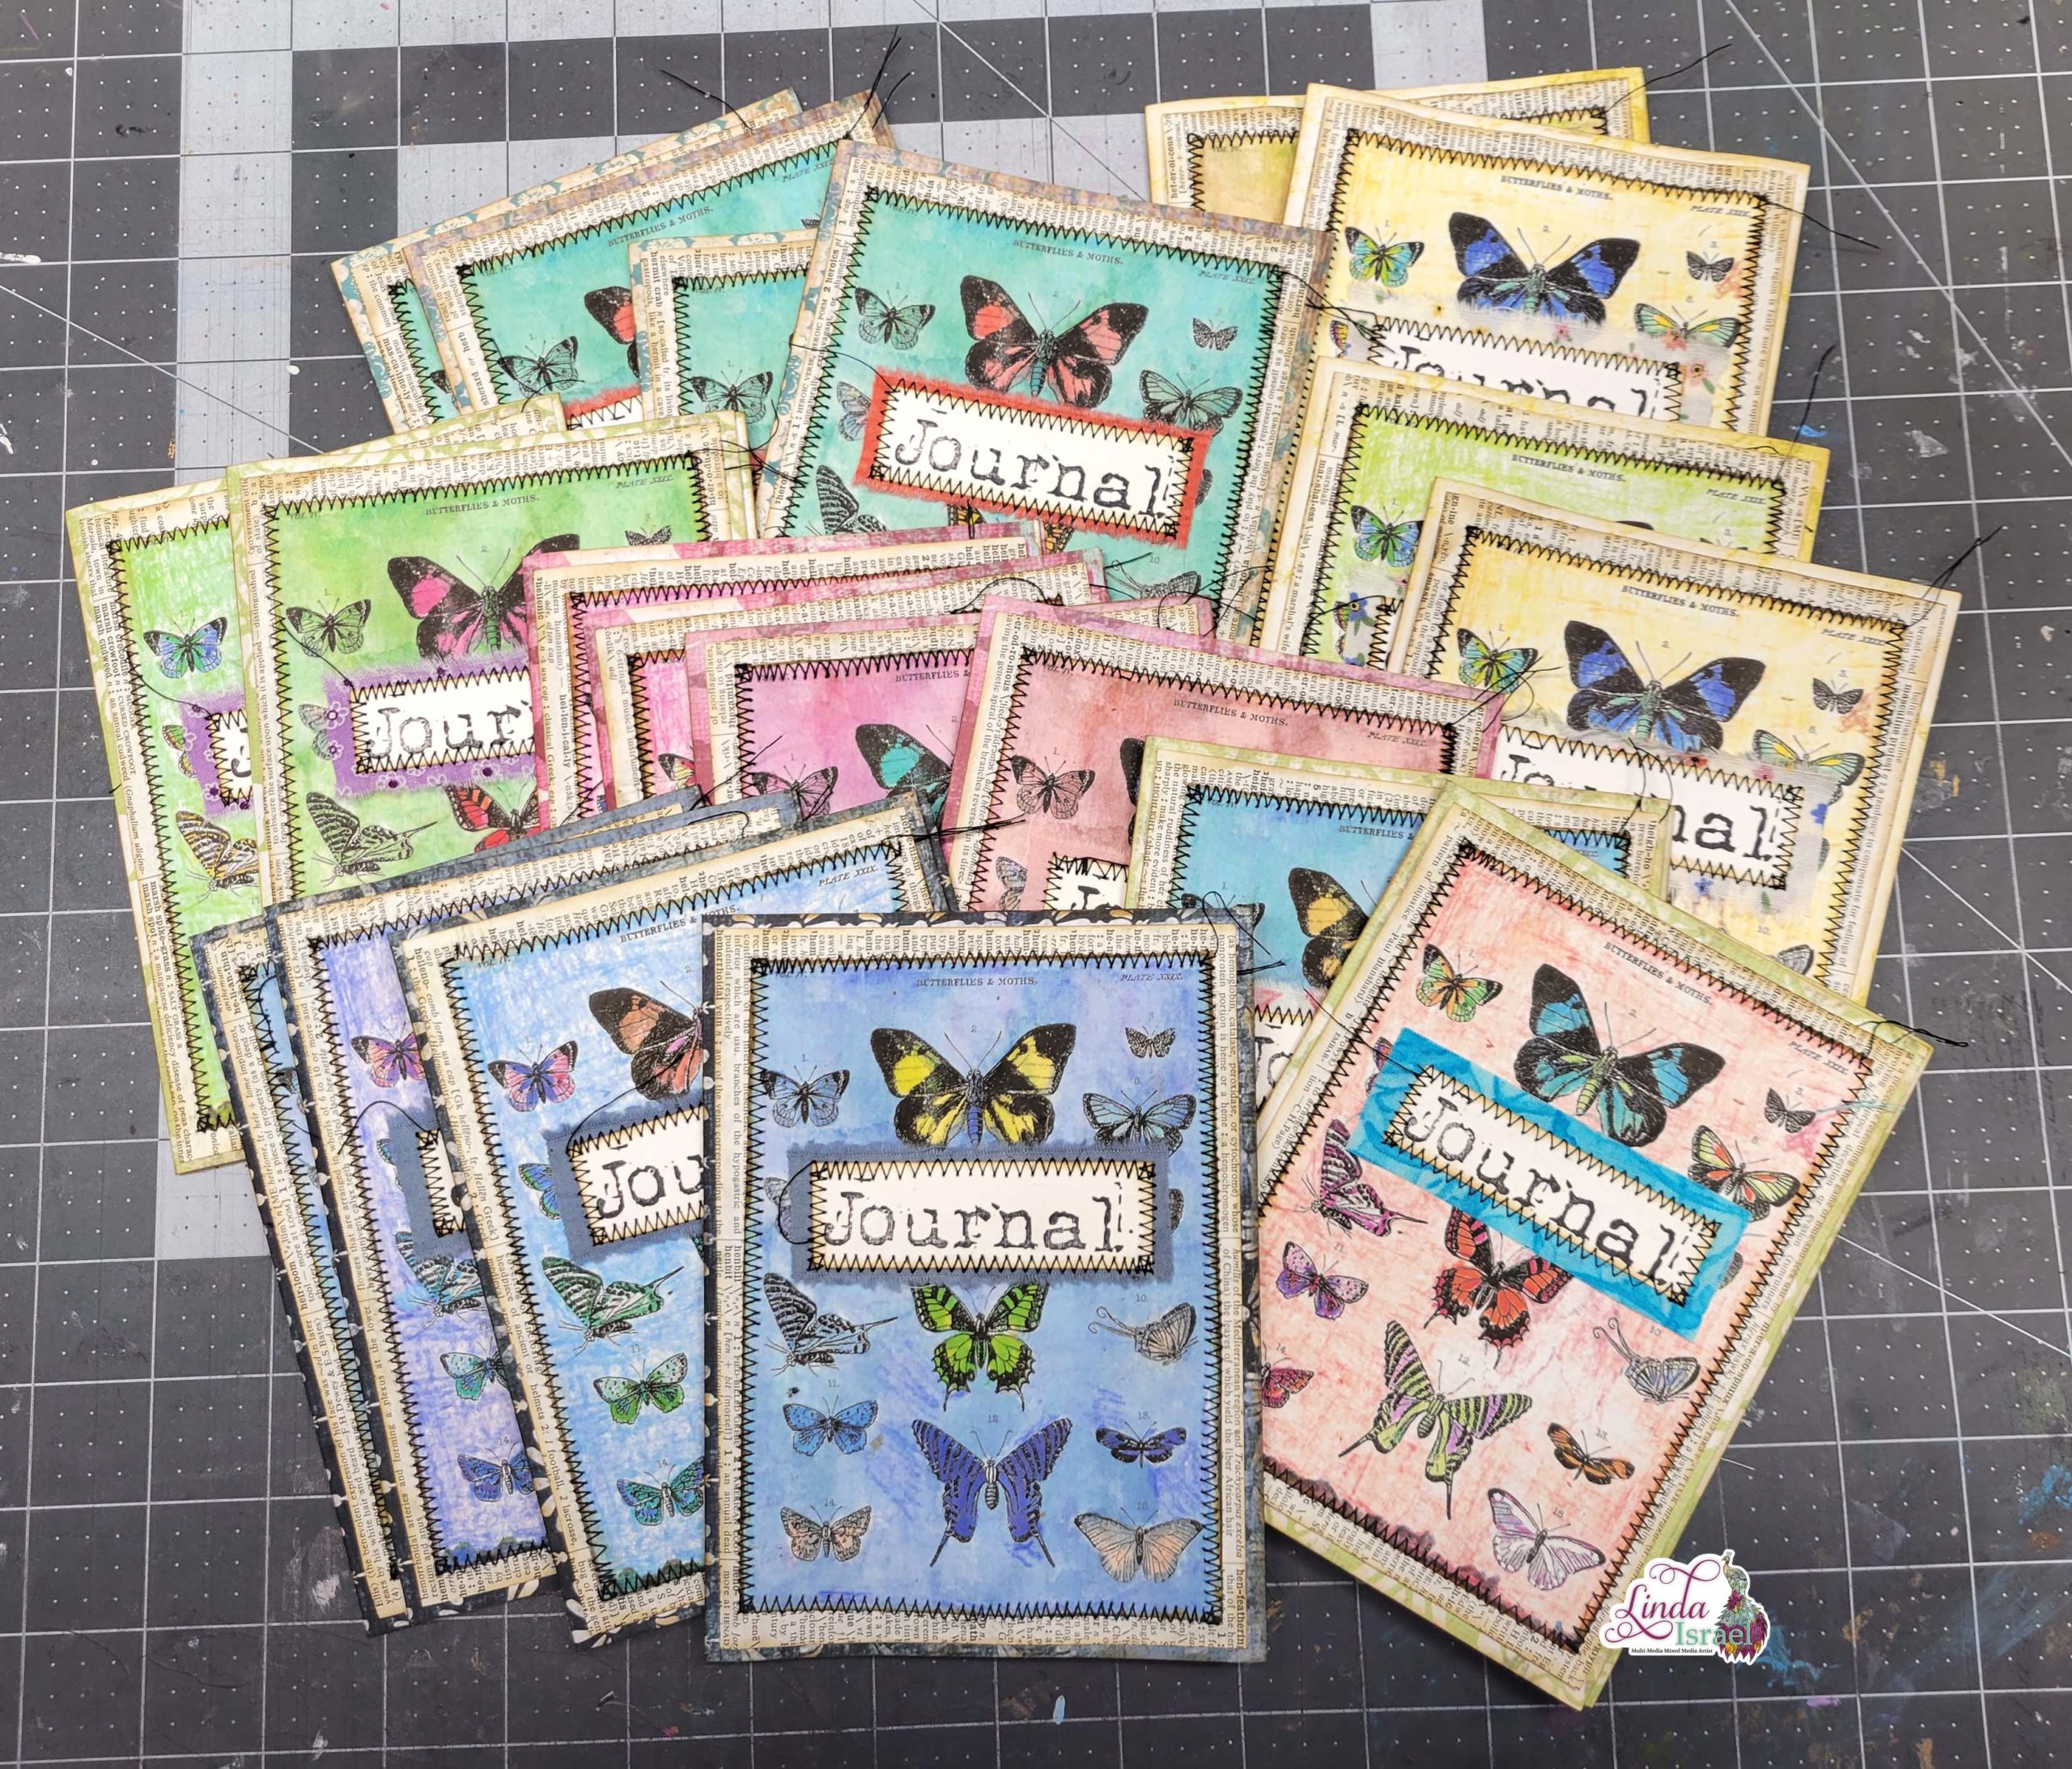 CFF631G Butterfly Collection Rubber Stamp